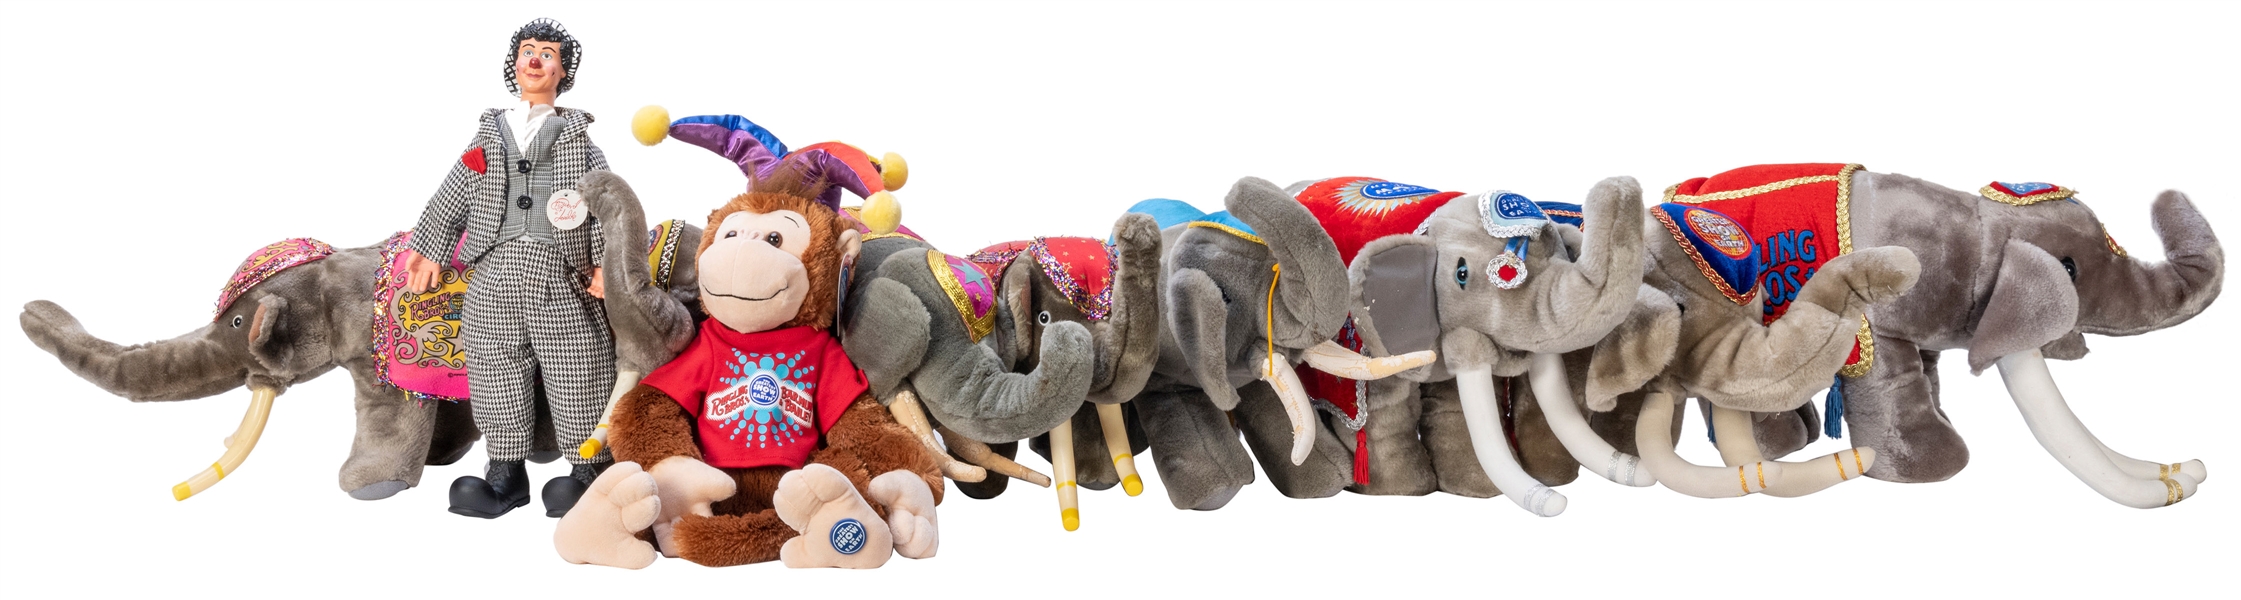  Lot of Plush Circus Elephants and Dolls. Over 20 pieces tog...